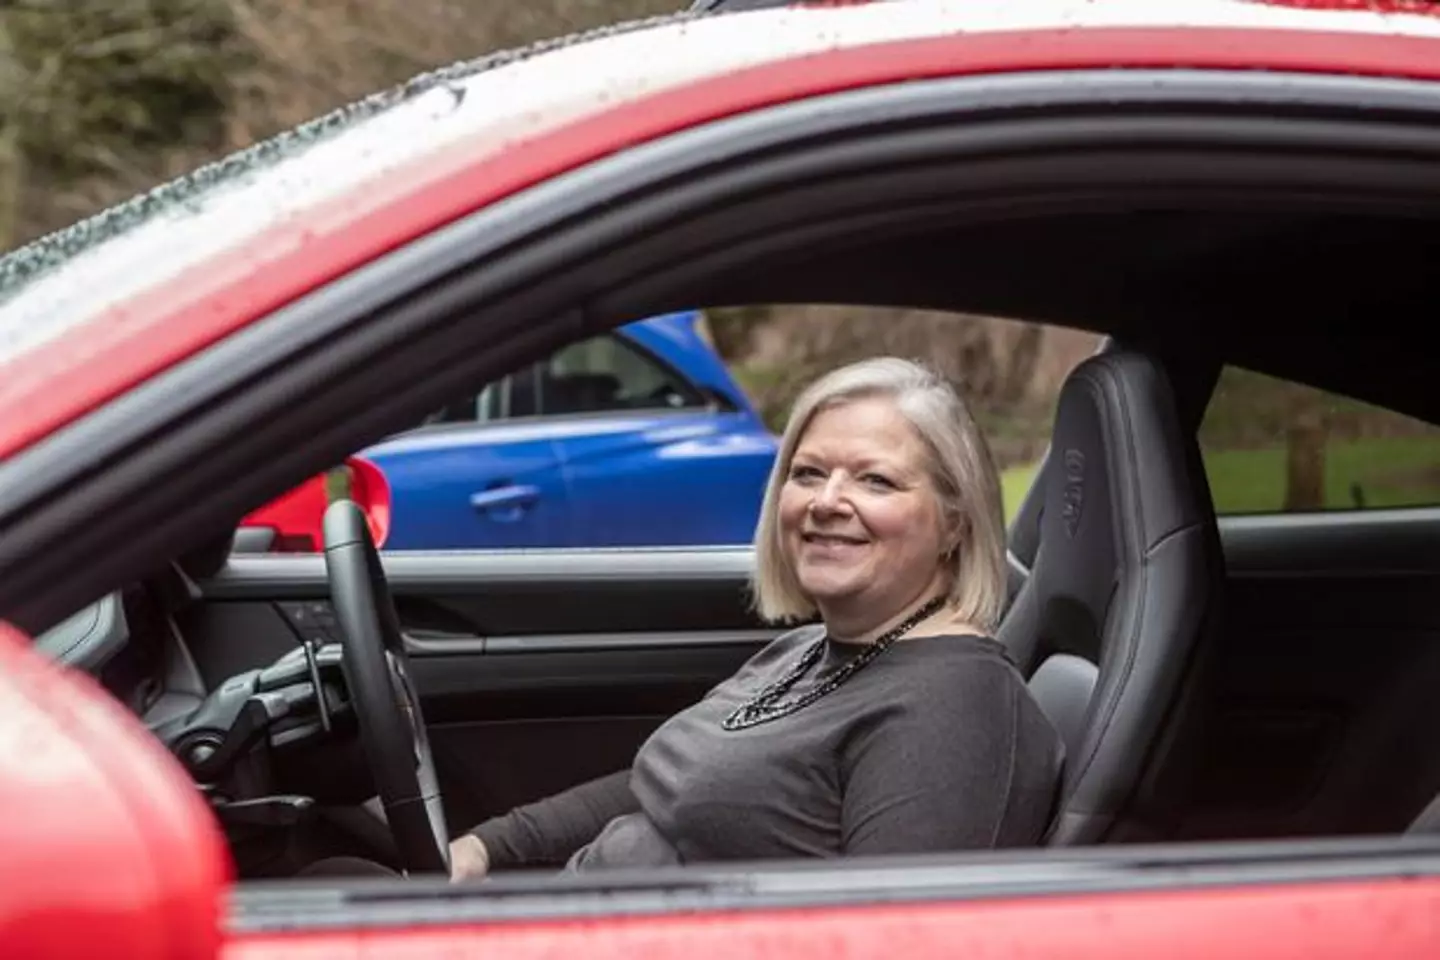 Joanne McGuigan, 49, won the red supercar but has decided not to keep it.